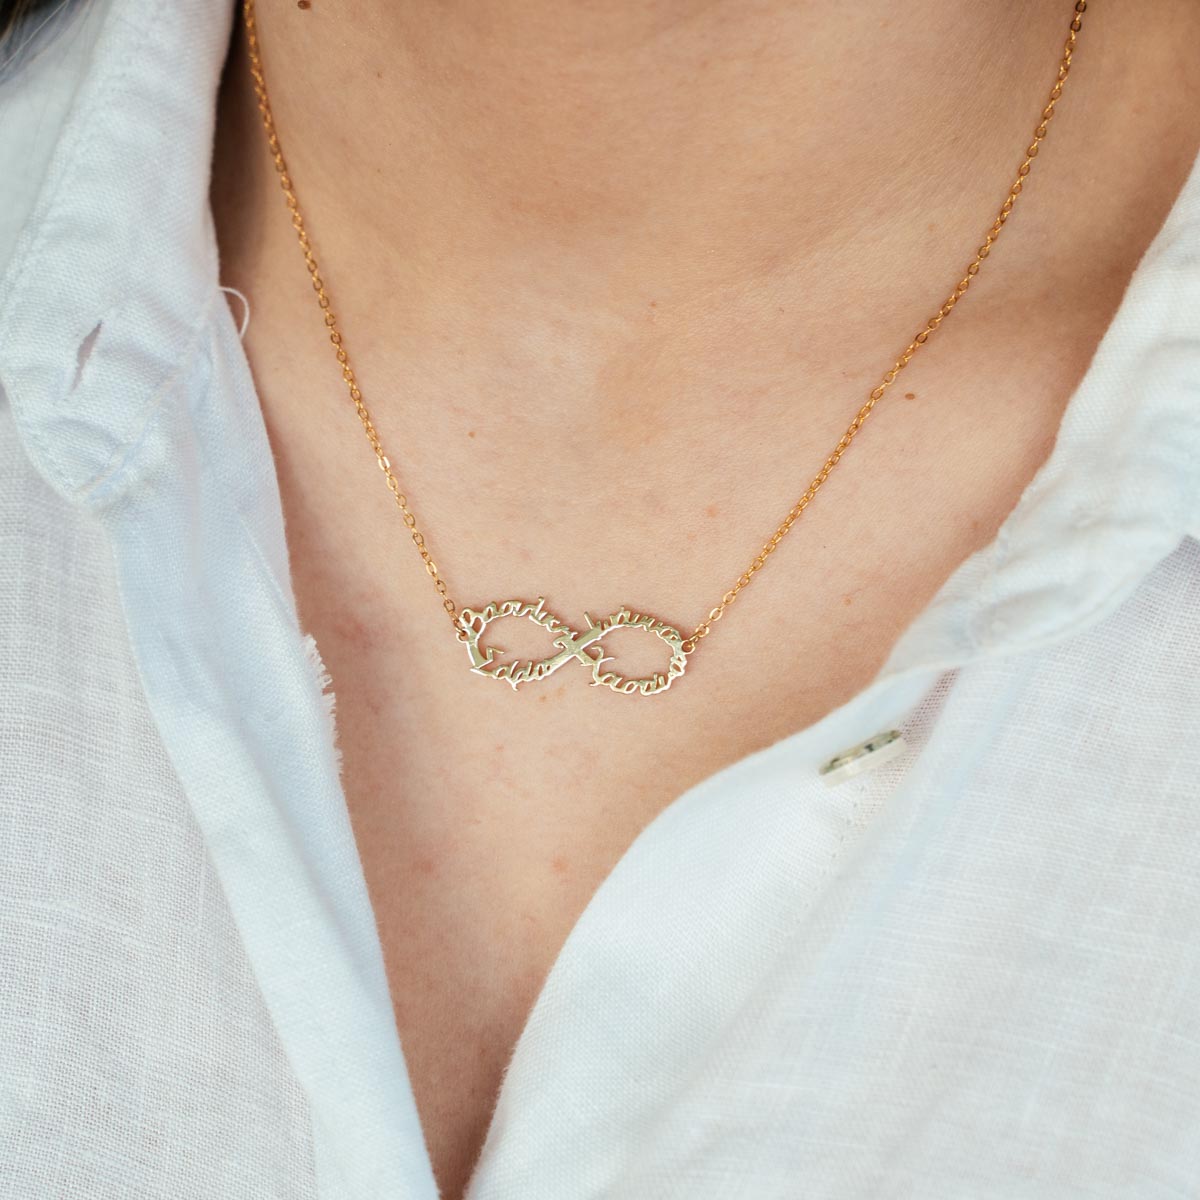 4 Greek Name Infinity Necklace